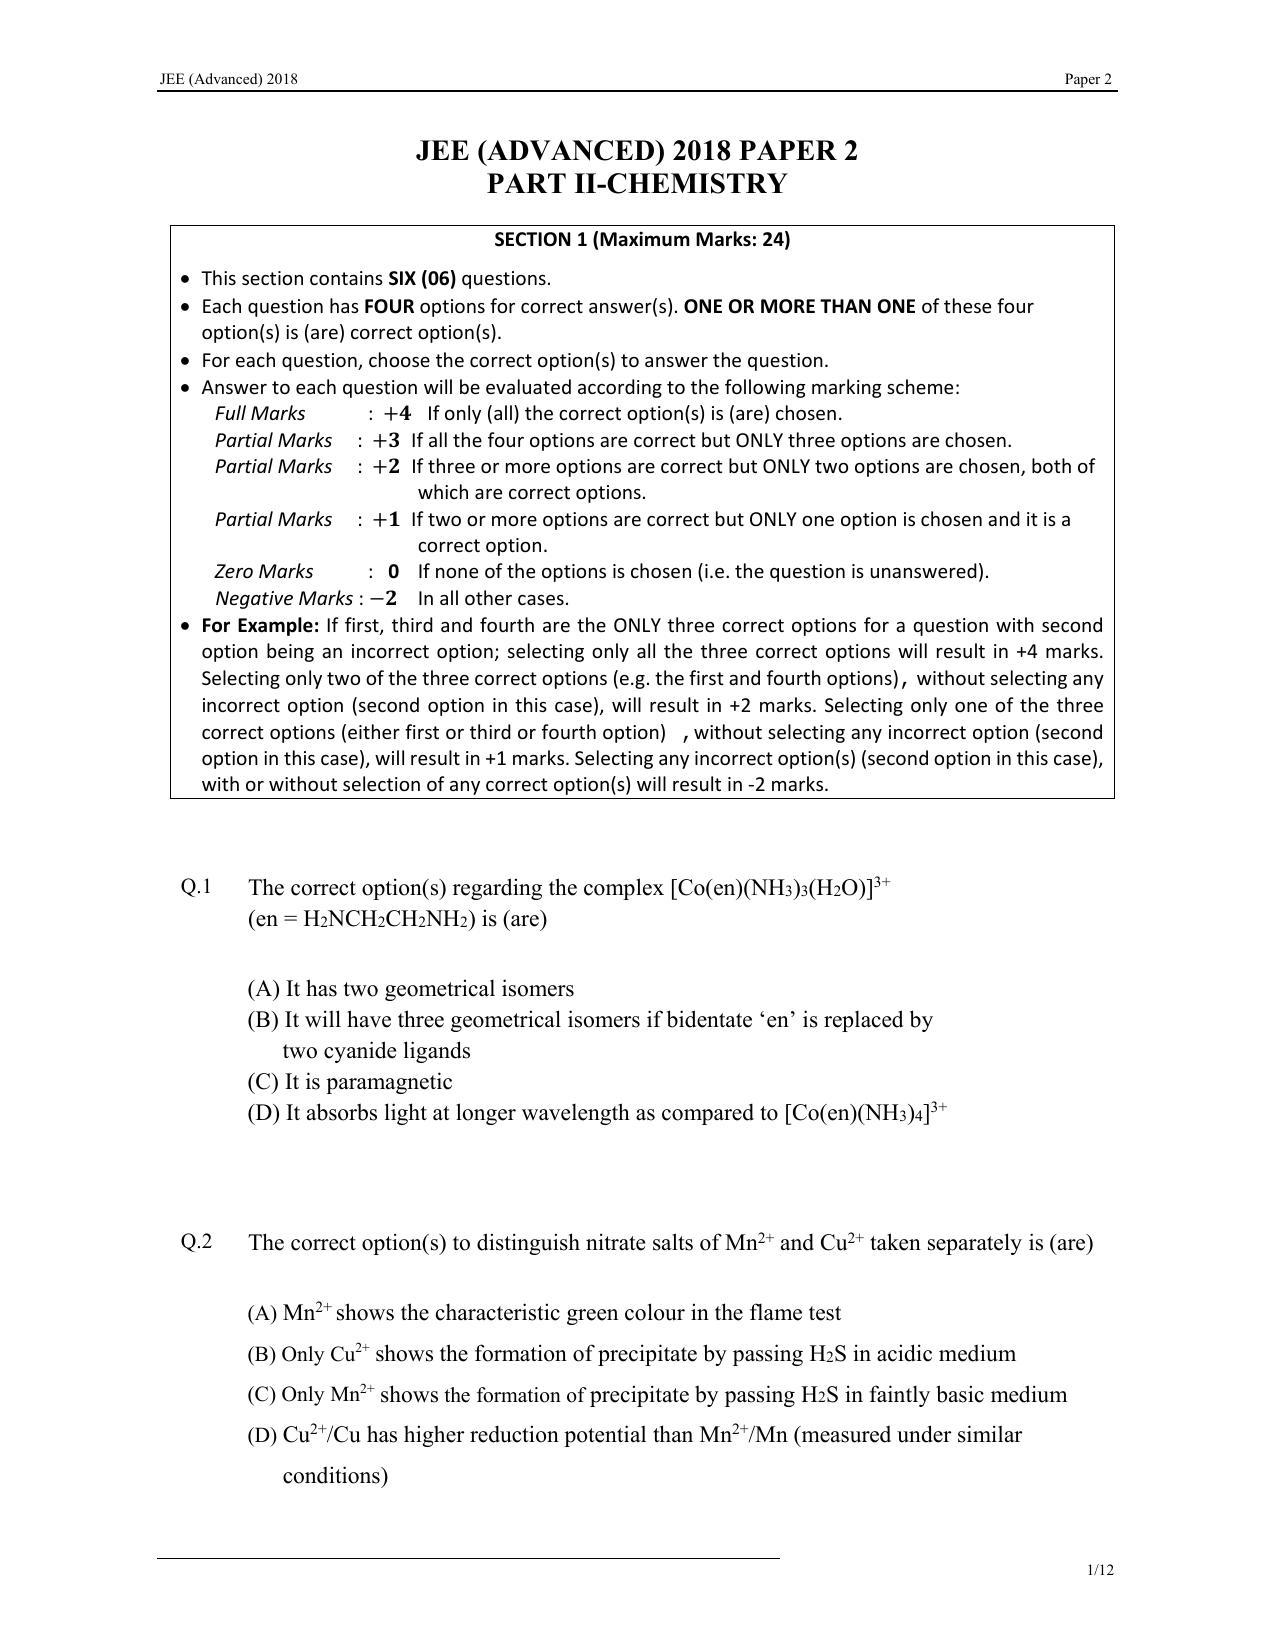 JEE (Advanced) 2018 Paper II Question Paper - Page 11